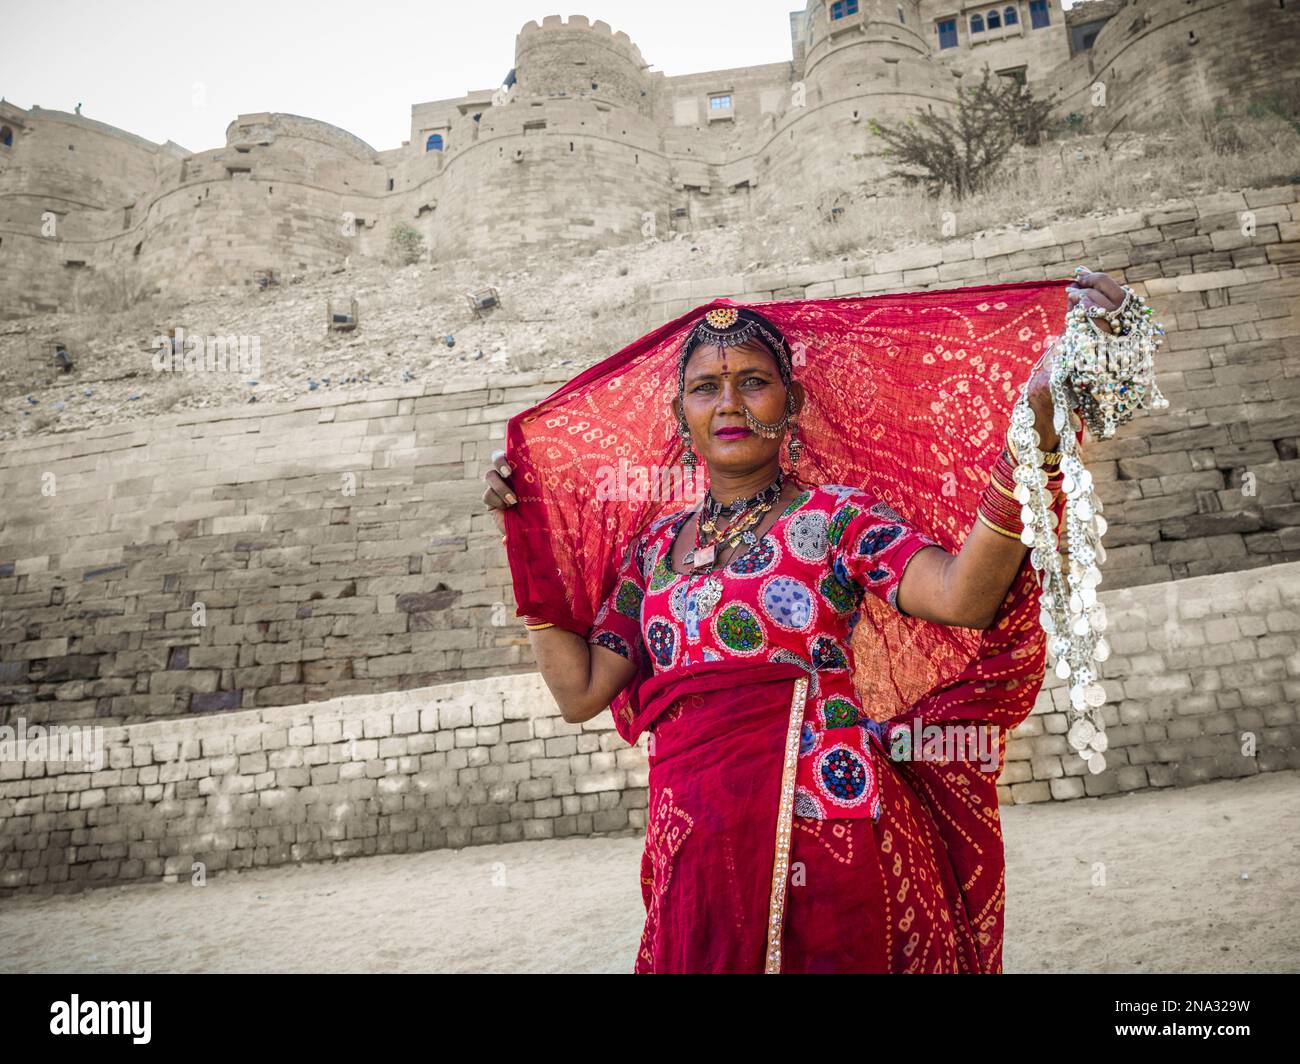 A woman in colourful traditional Indian clothing selling jewelry, Jaisalmer Fort; Jaisalmer, Rajasthan, India Stock Photo